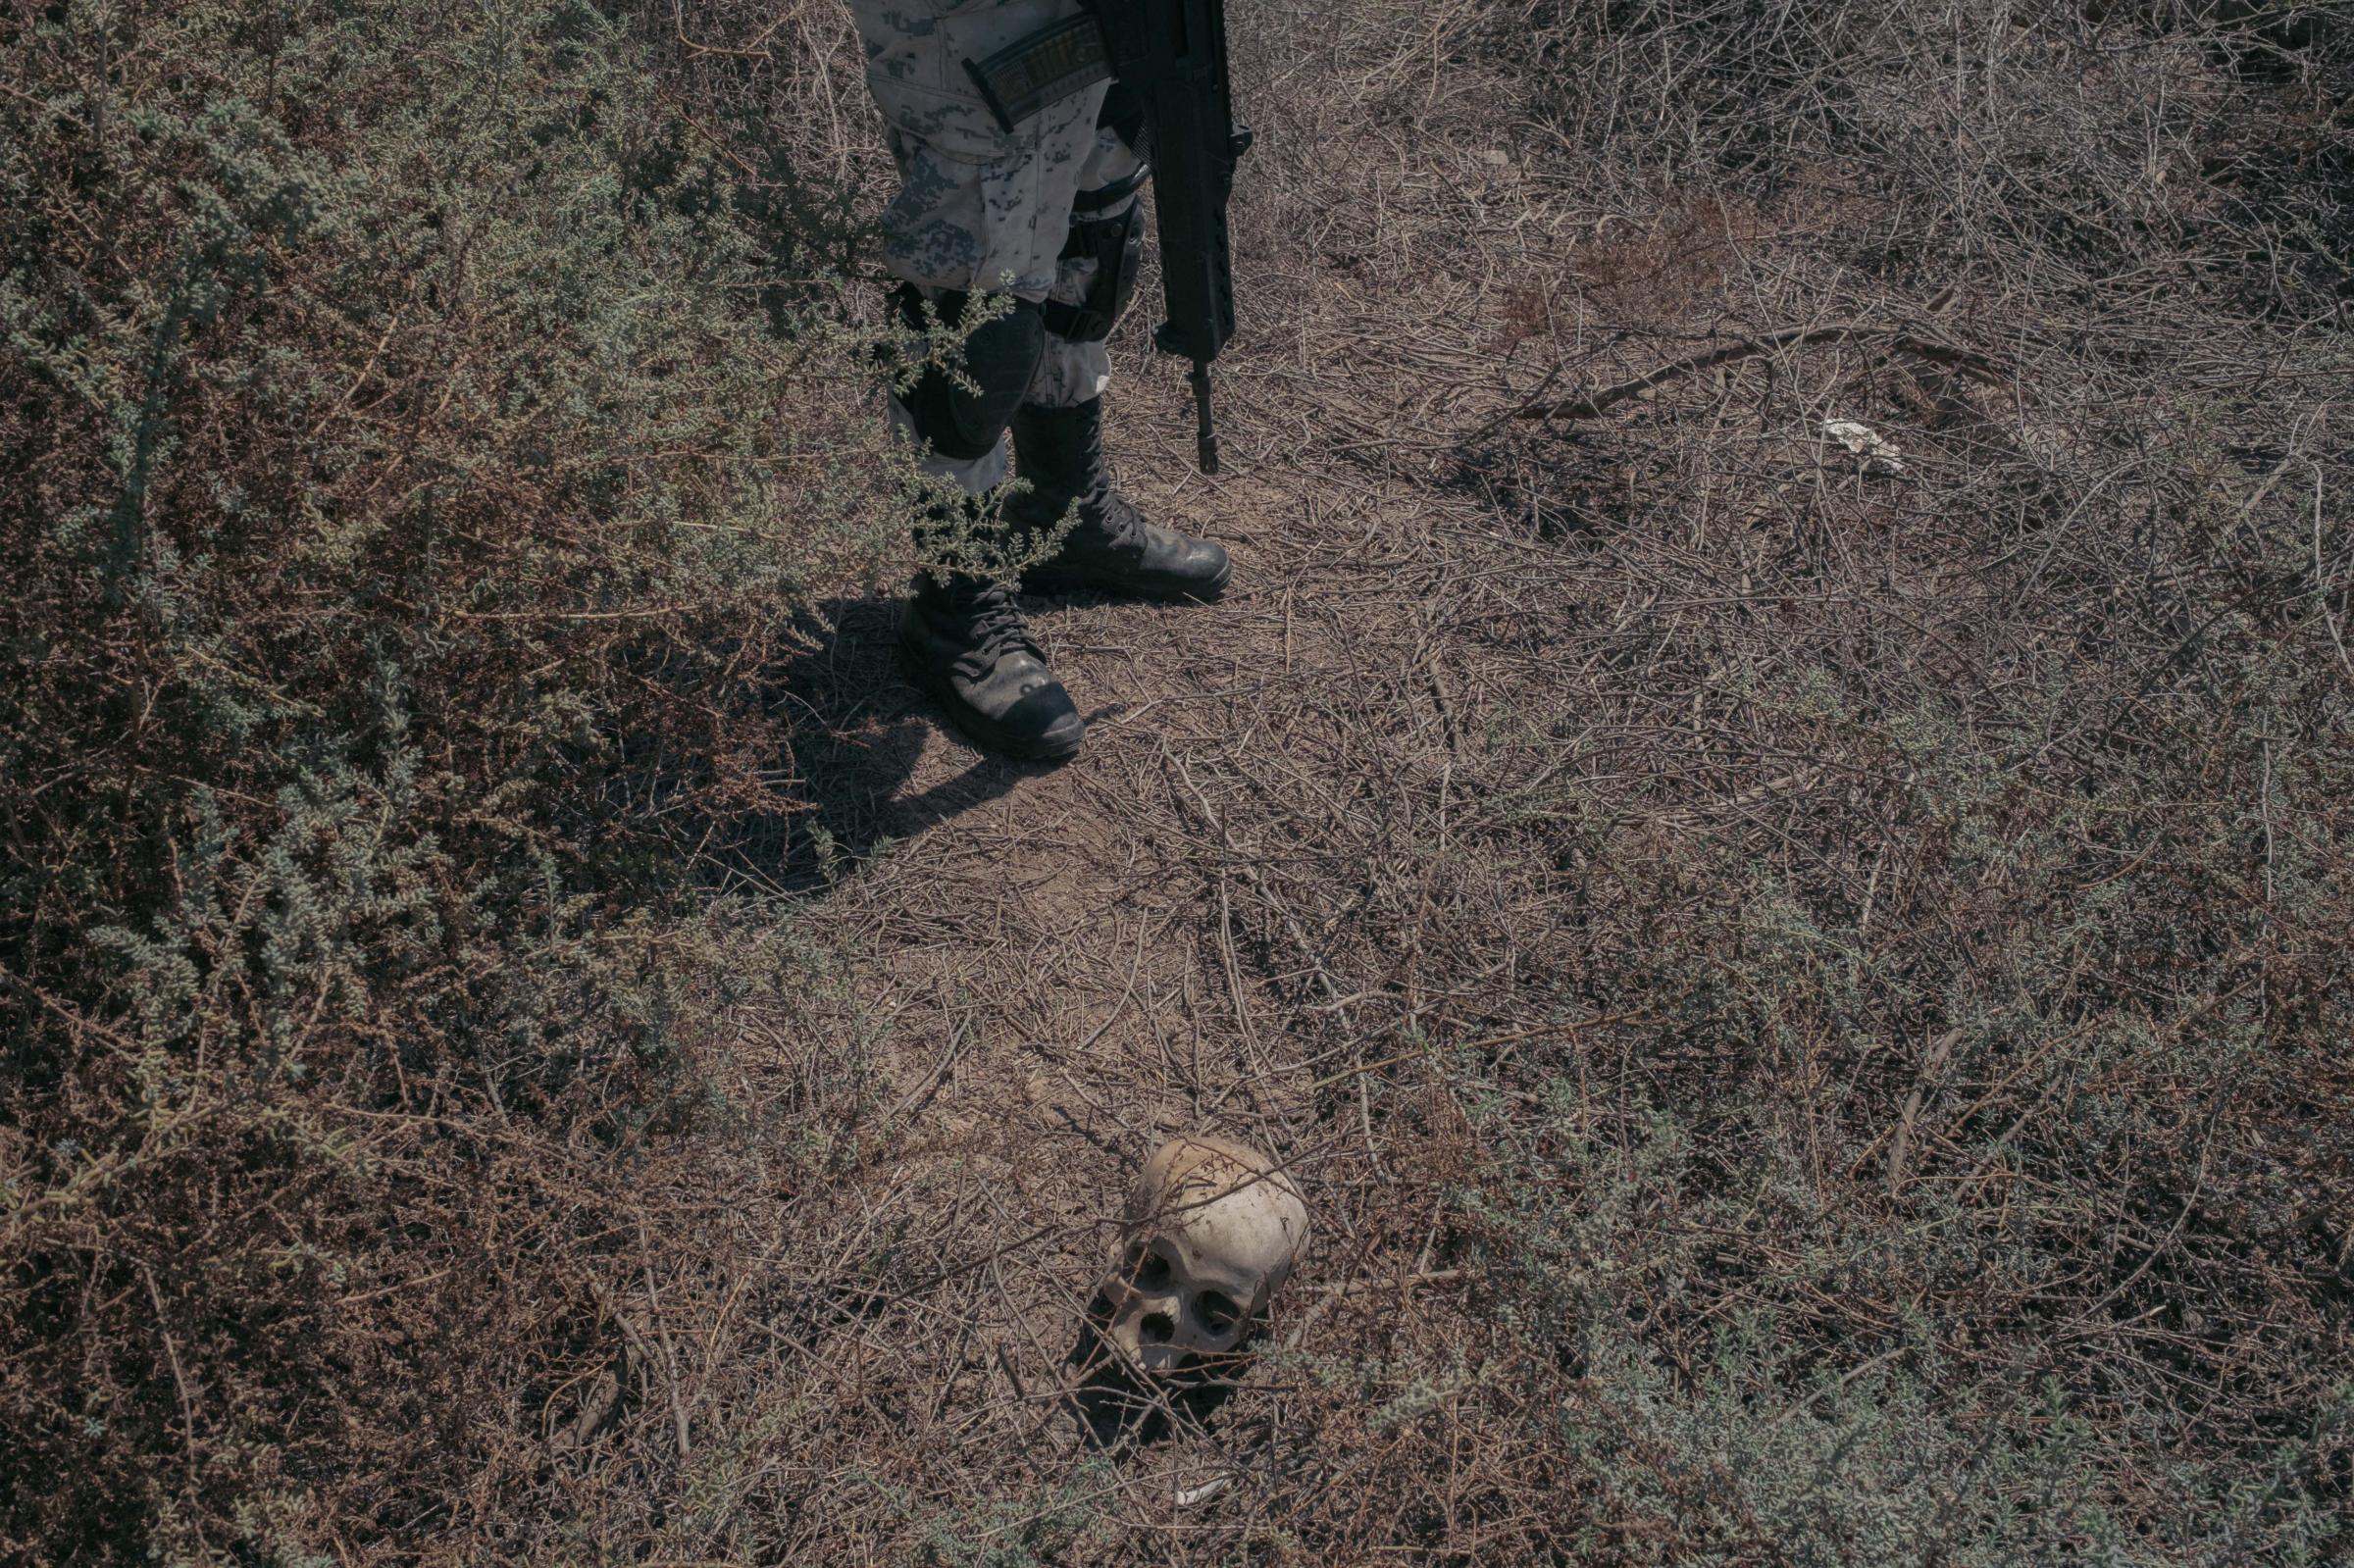 Lost Treasures - An element of the National Guard stands next to the skull...